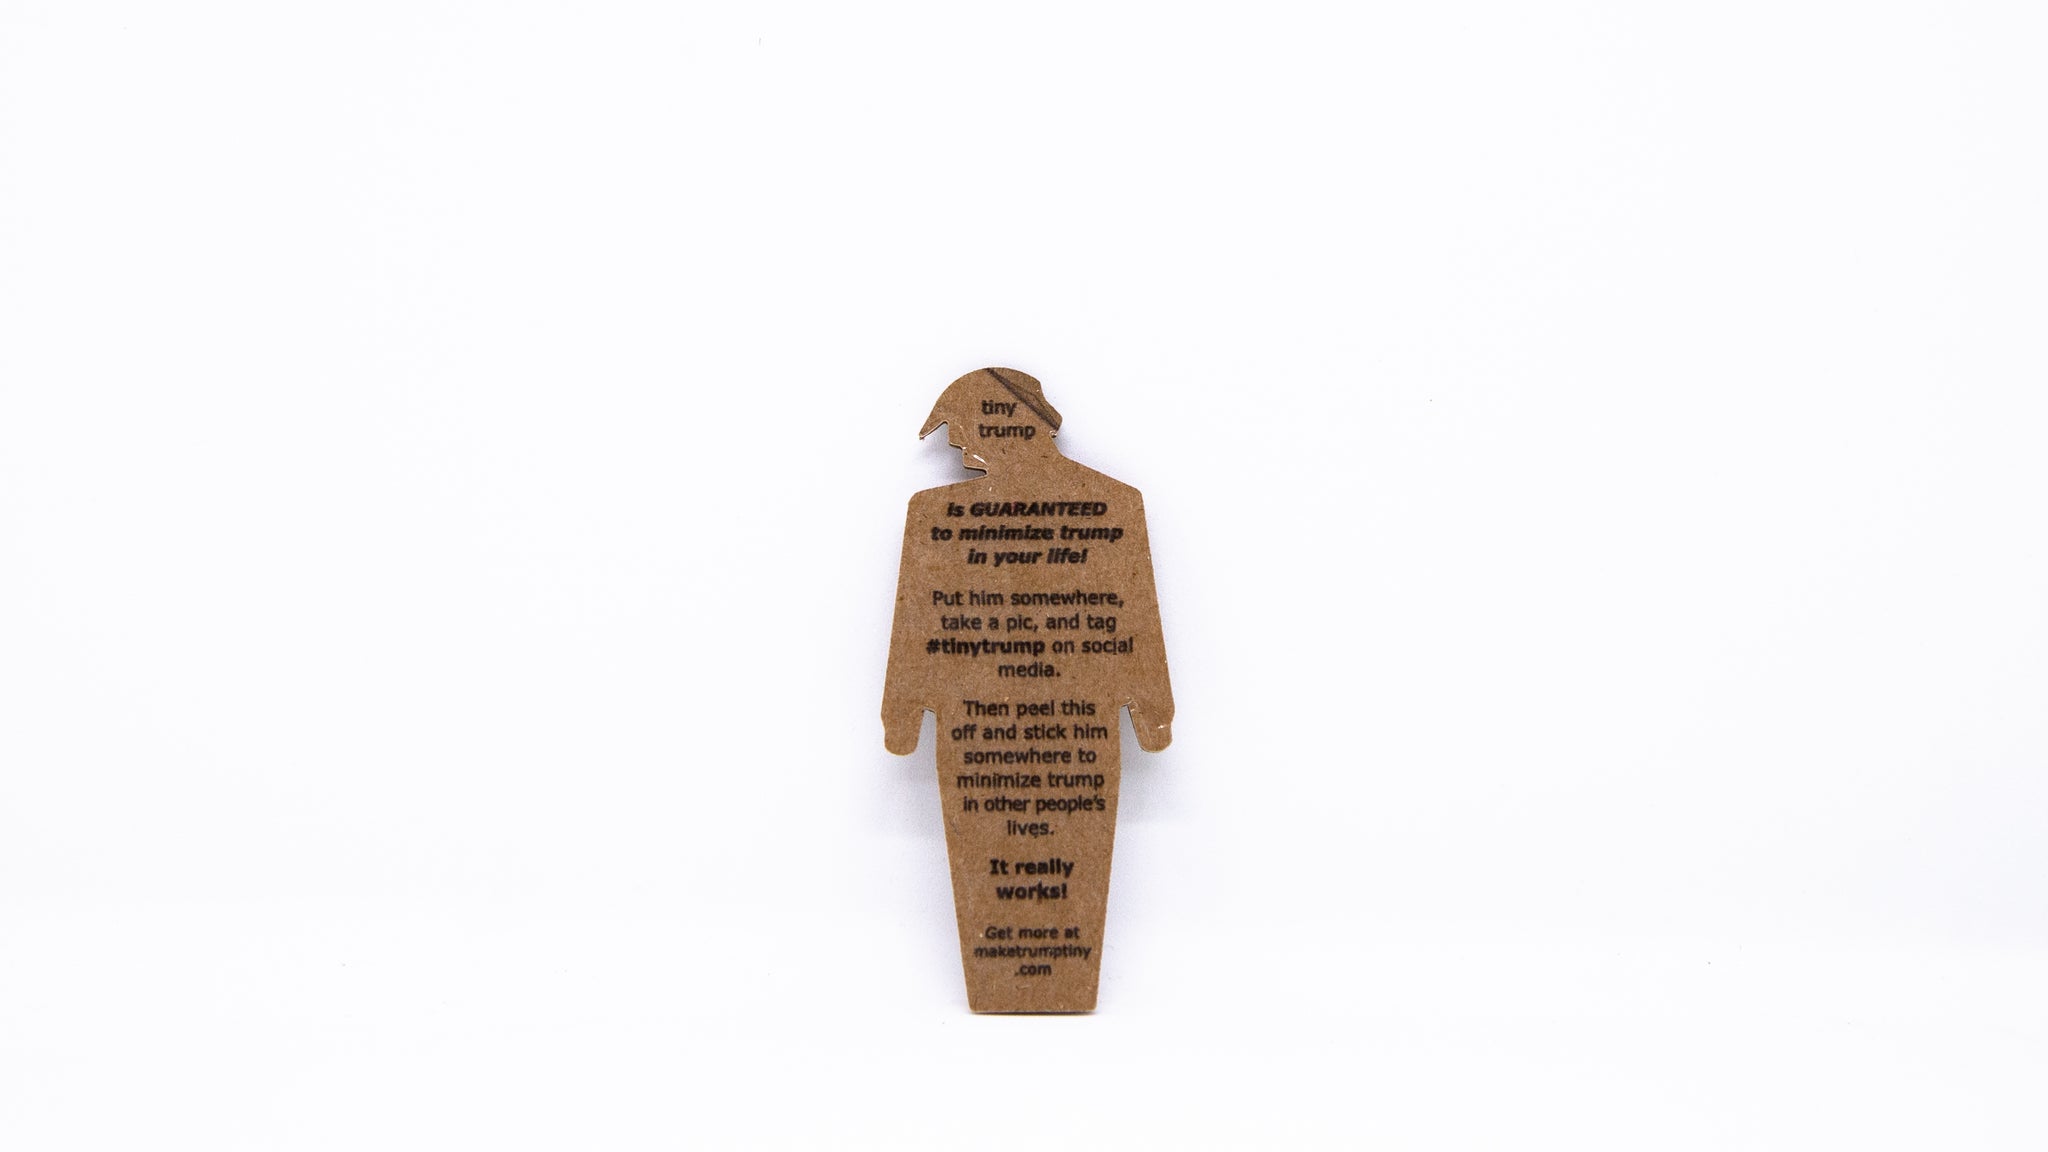 The back of a tiny trump showing a peel off label with the following text: "tiny trump is guaranteed to minimize trump in your life! Put him somewhere, take a pic, and tag #tinytrump on social media. Then peel this off and stick him somewhere to minimize trump in other people's lives. It really works! Get more at maketrumptiny.com"